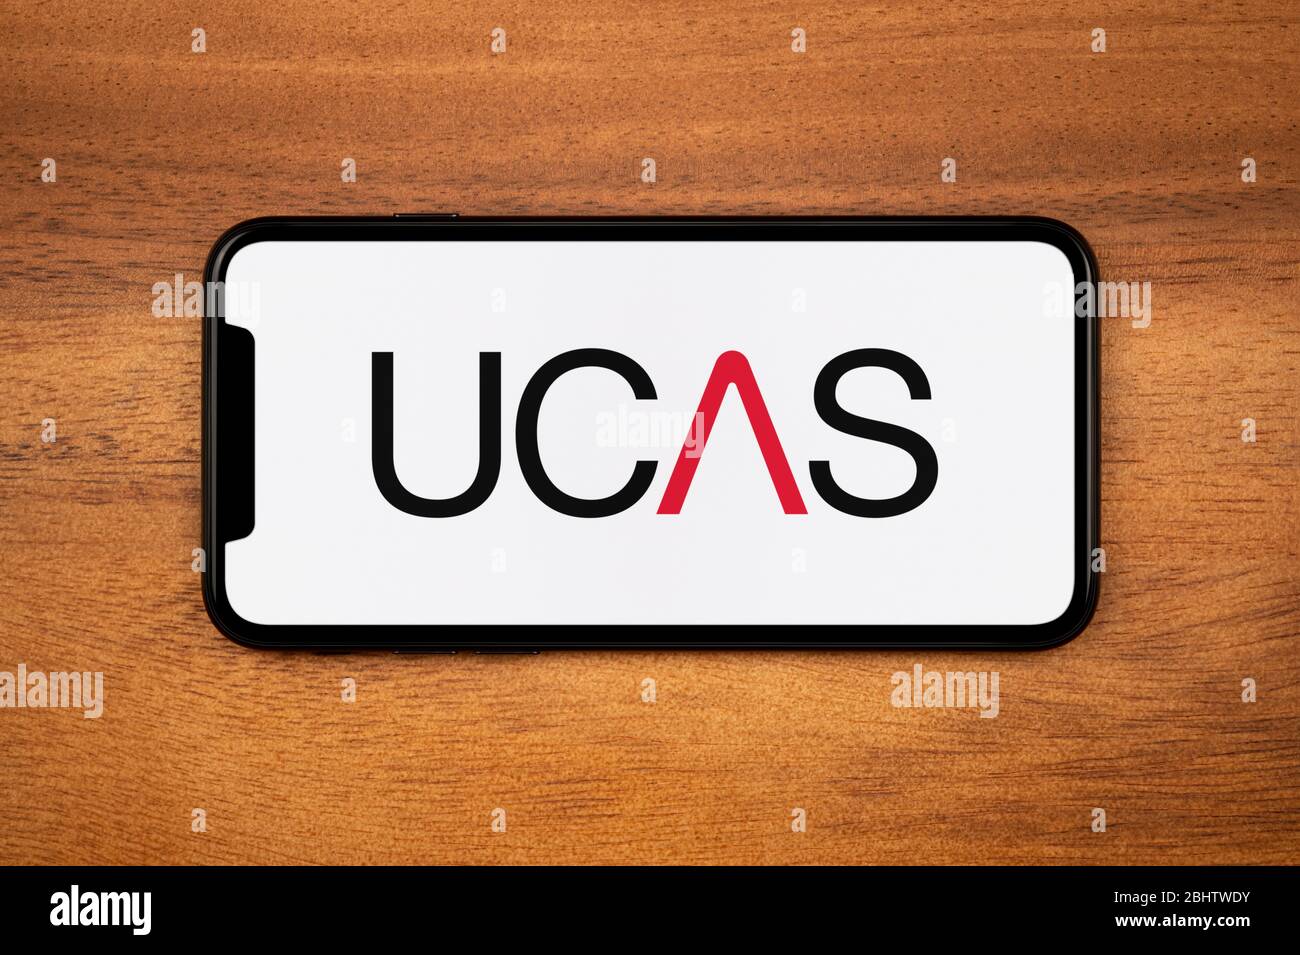 A smartphone showing the UCAS logo rests on a plain wooden table (Editorial use only). Stock Photo